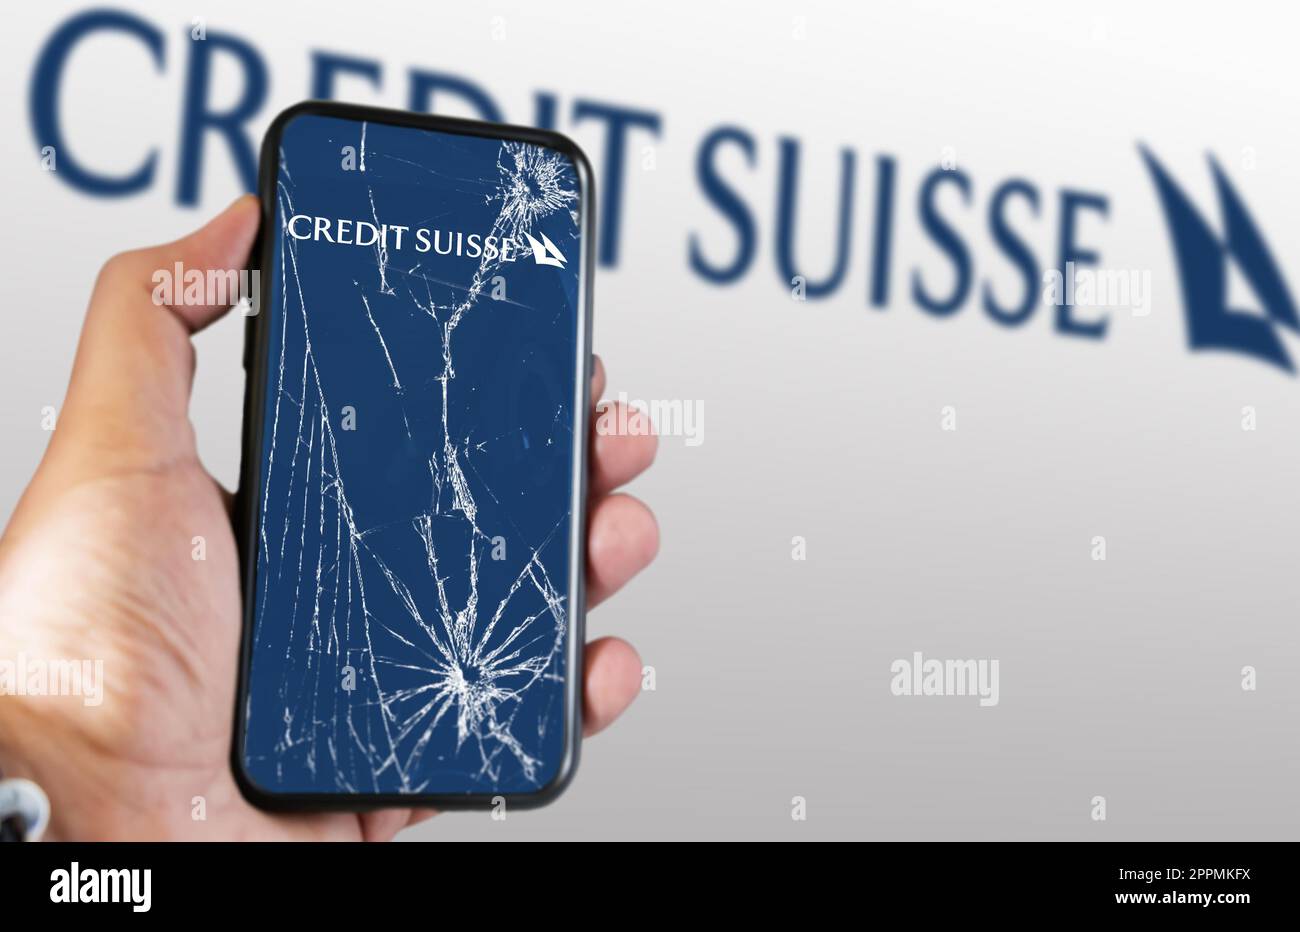 Hand holding a phone with the Credit Suisse logo on the cracked screen Stock Photo